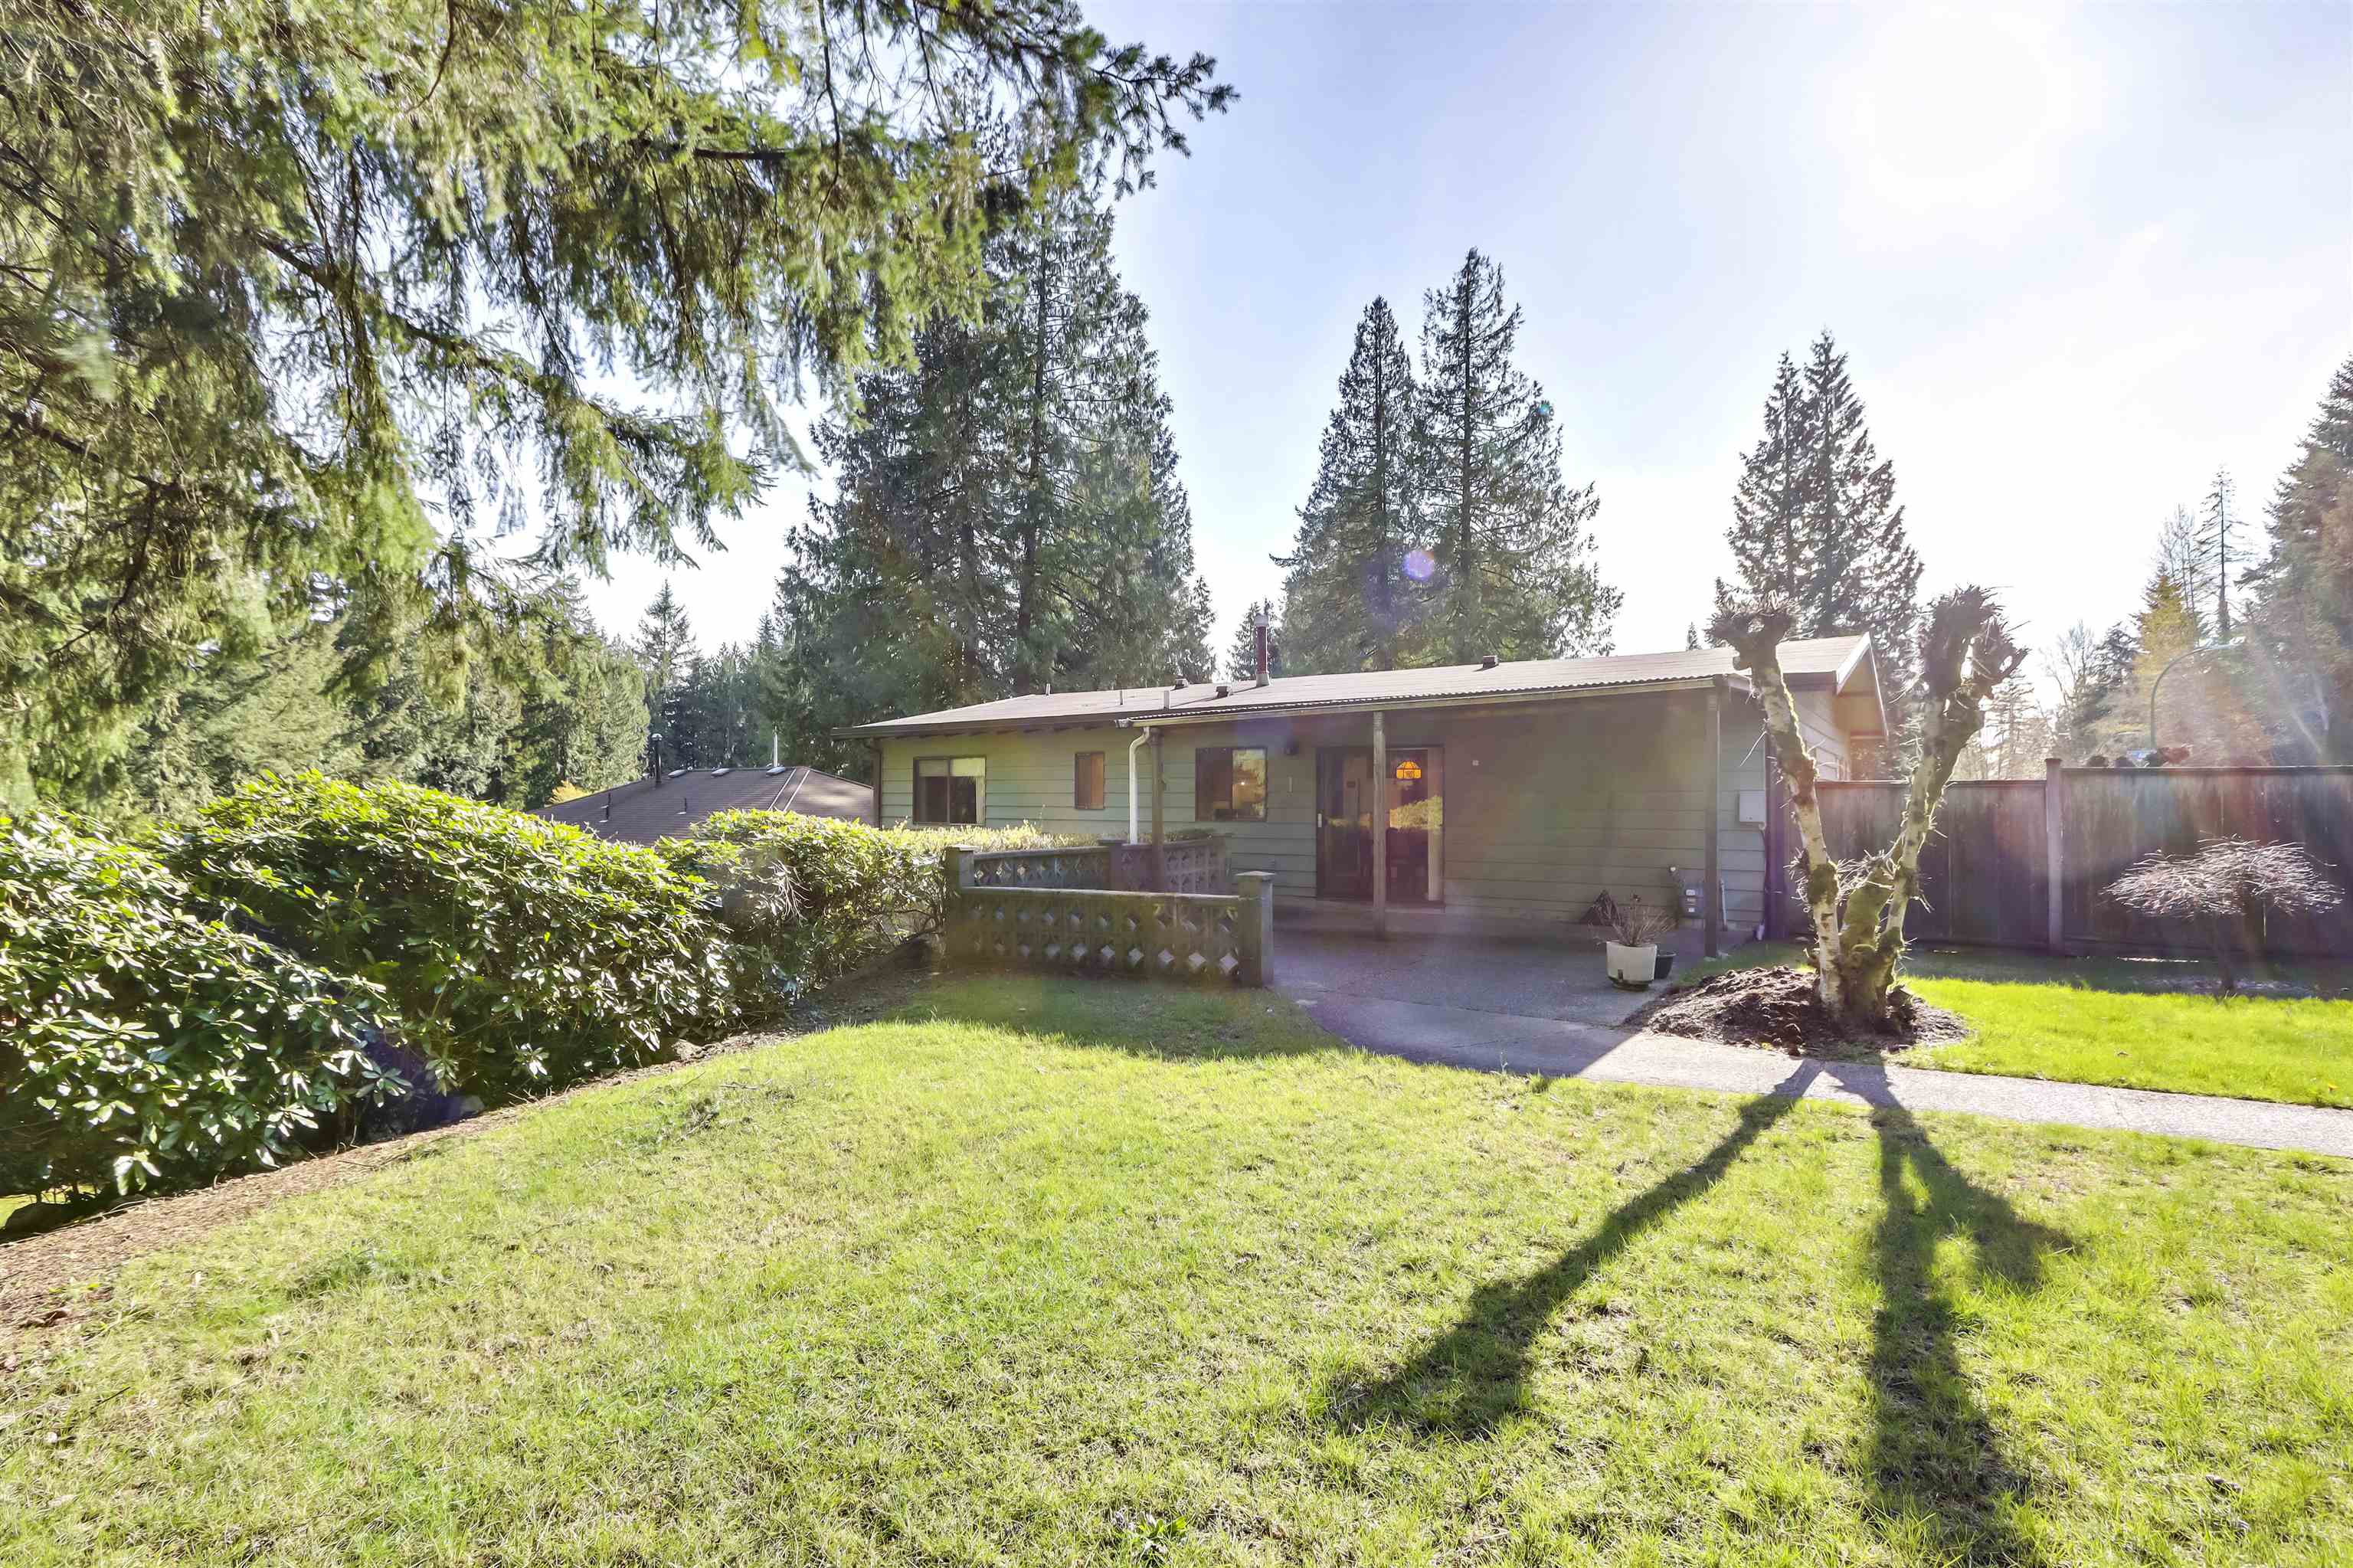 Listing image of 3798 ST ANDREWS AVENUE